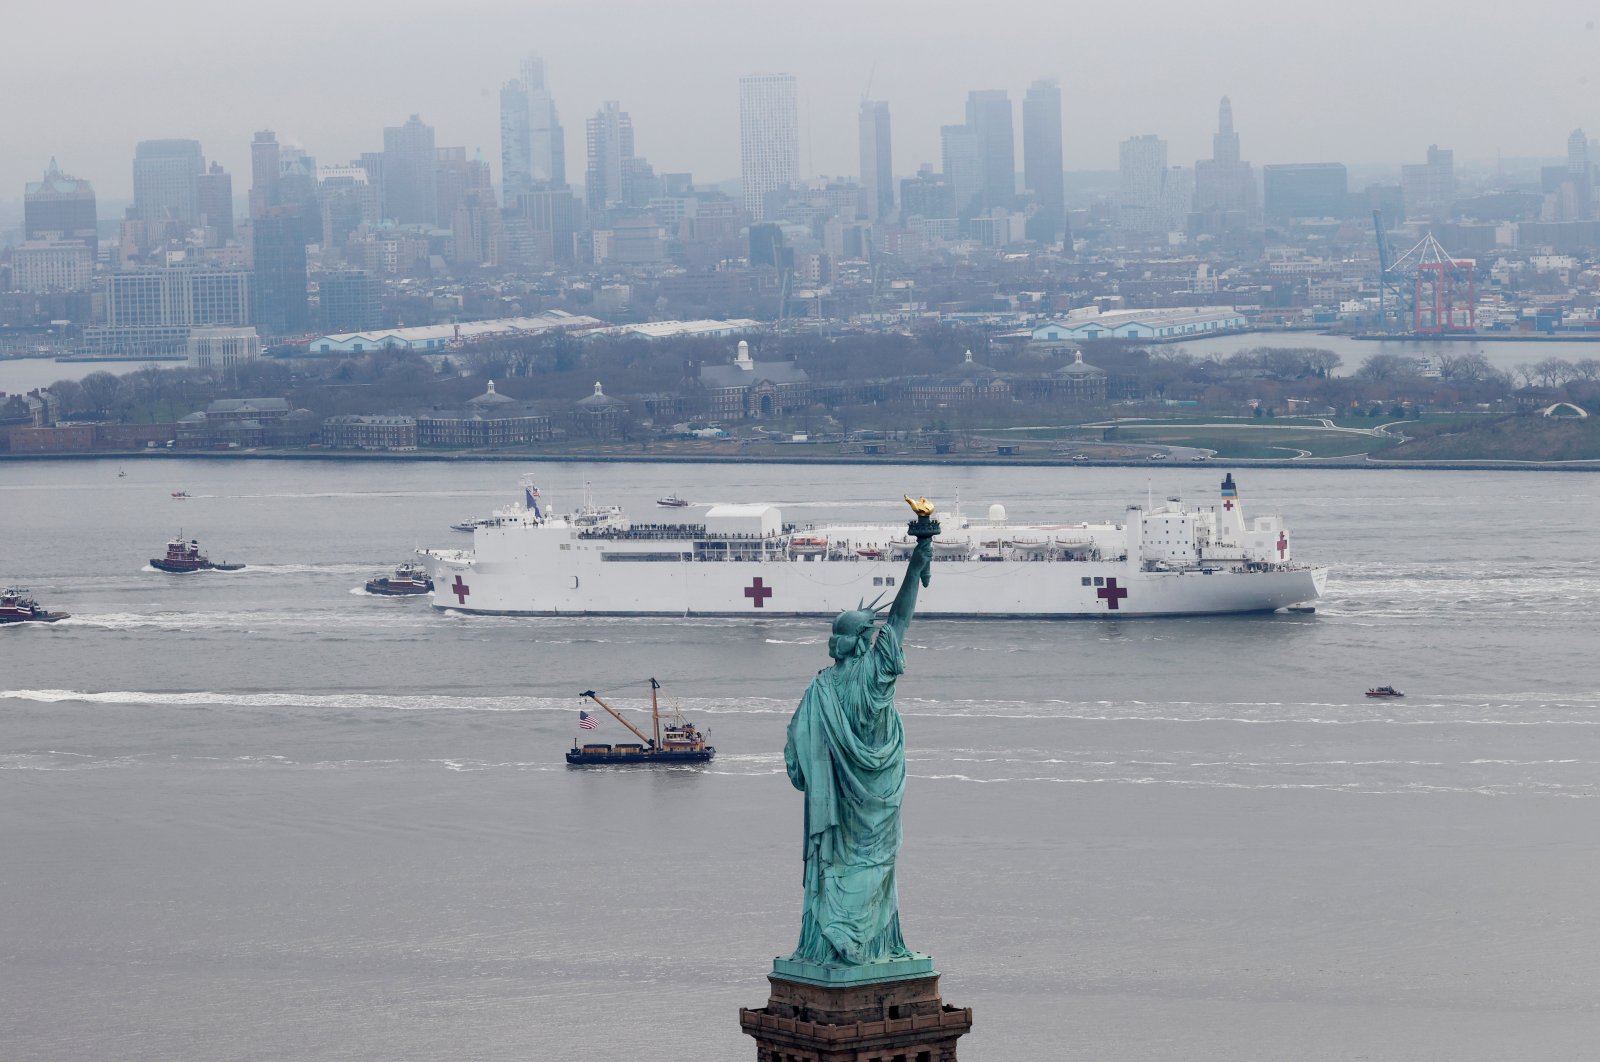 The USNS Comfort passes the Statue of Liberty as it enters New York Harbor during the outbreak of the coronavirus disease (COVID-19) in New York City, U.S., Monday, March 30, 2020. (Reuters Photo)